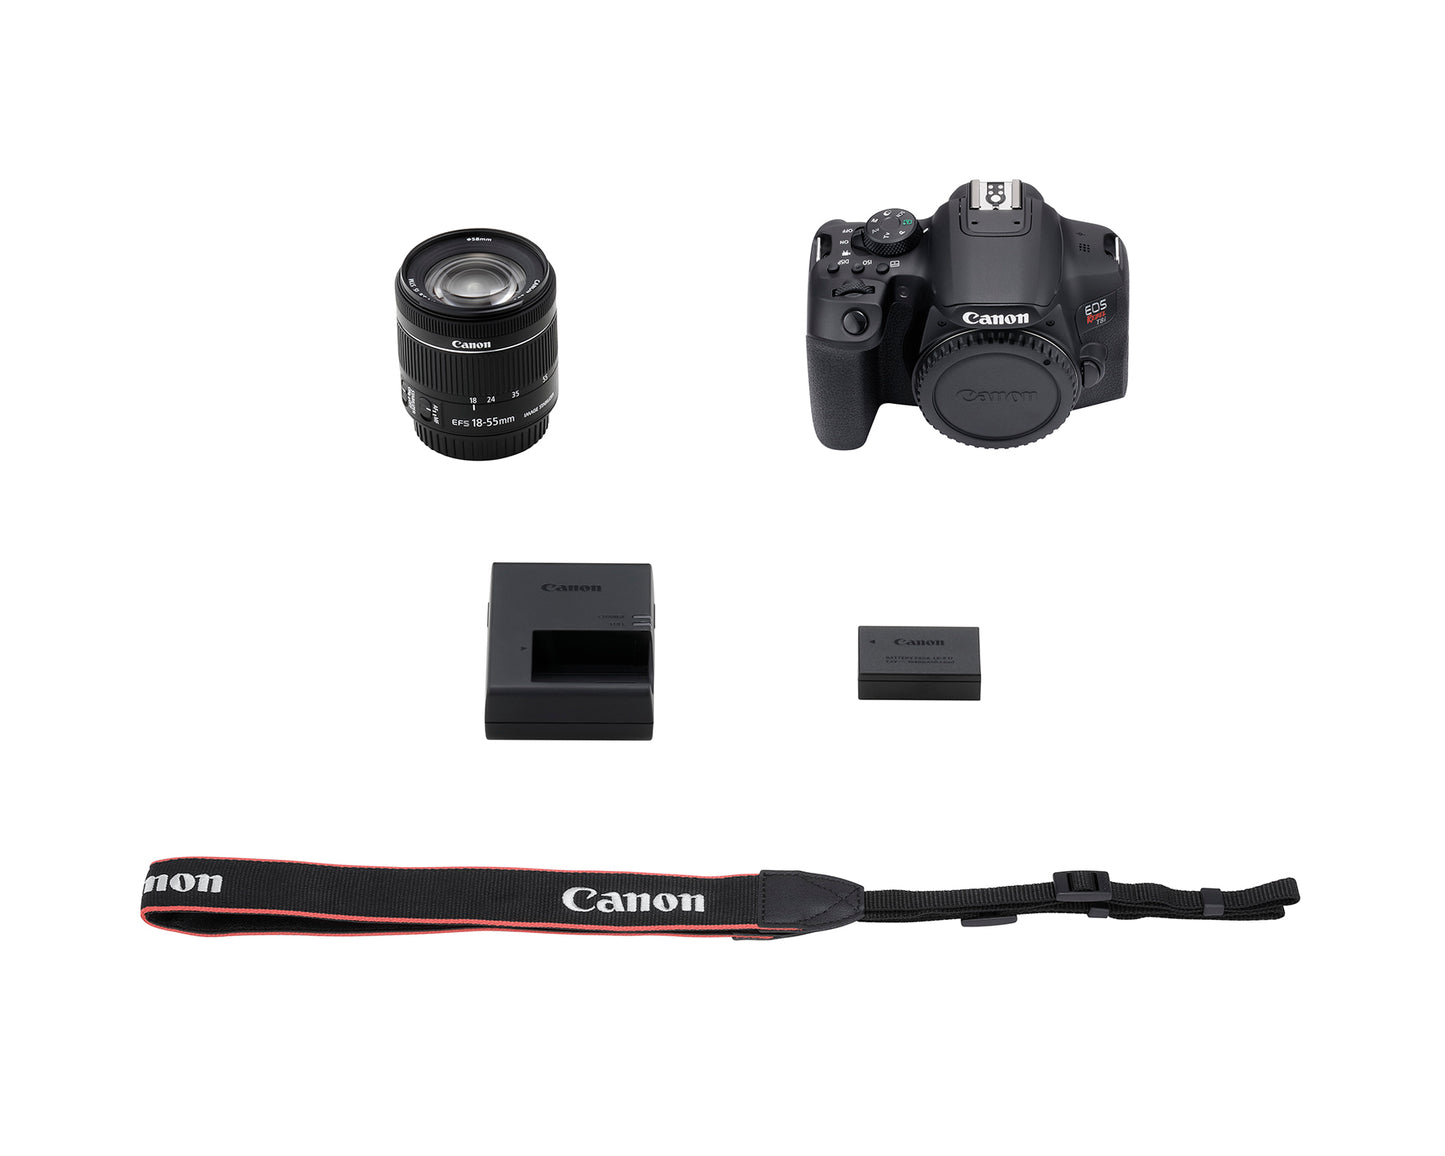 Canon EOS Rebel T8i w/ 18-55mm f/3.5-5.6 IS STM Lens